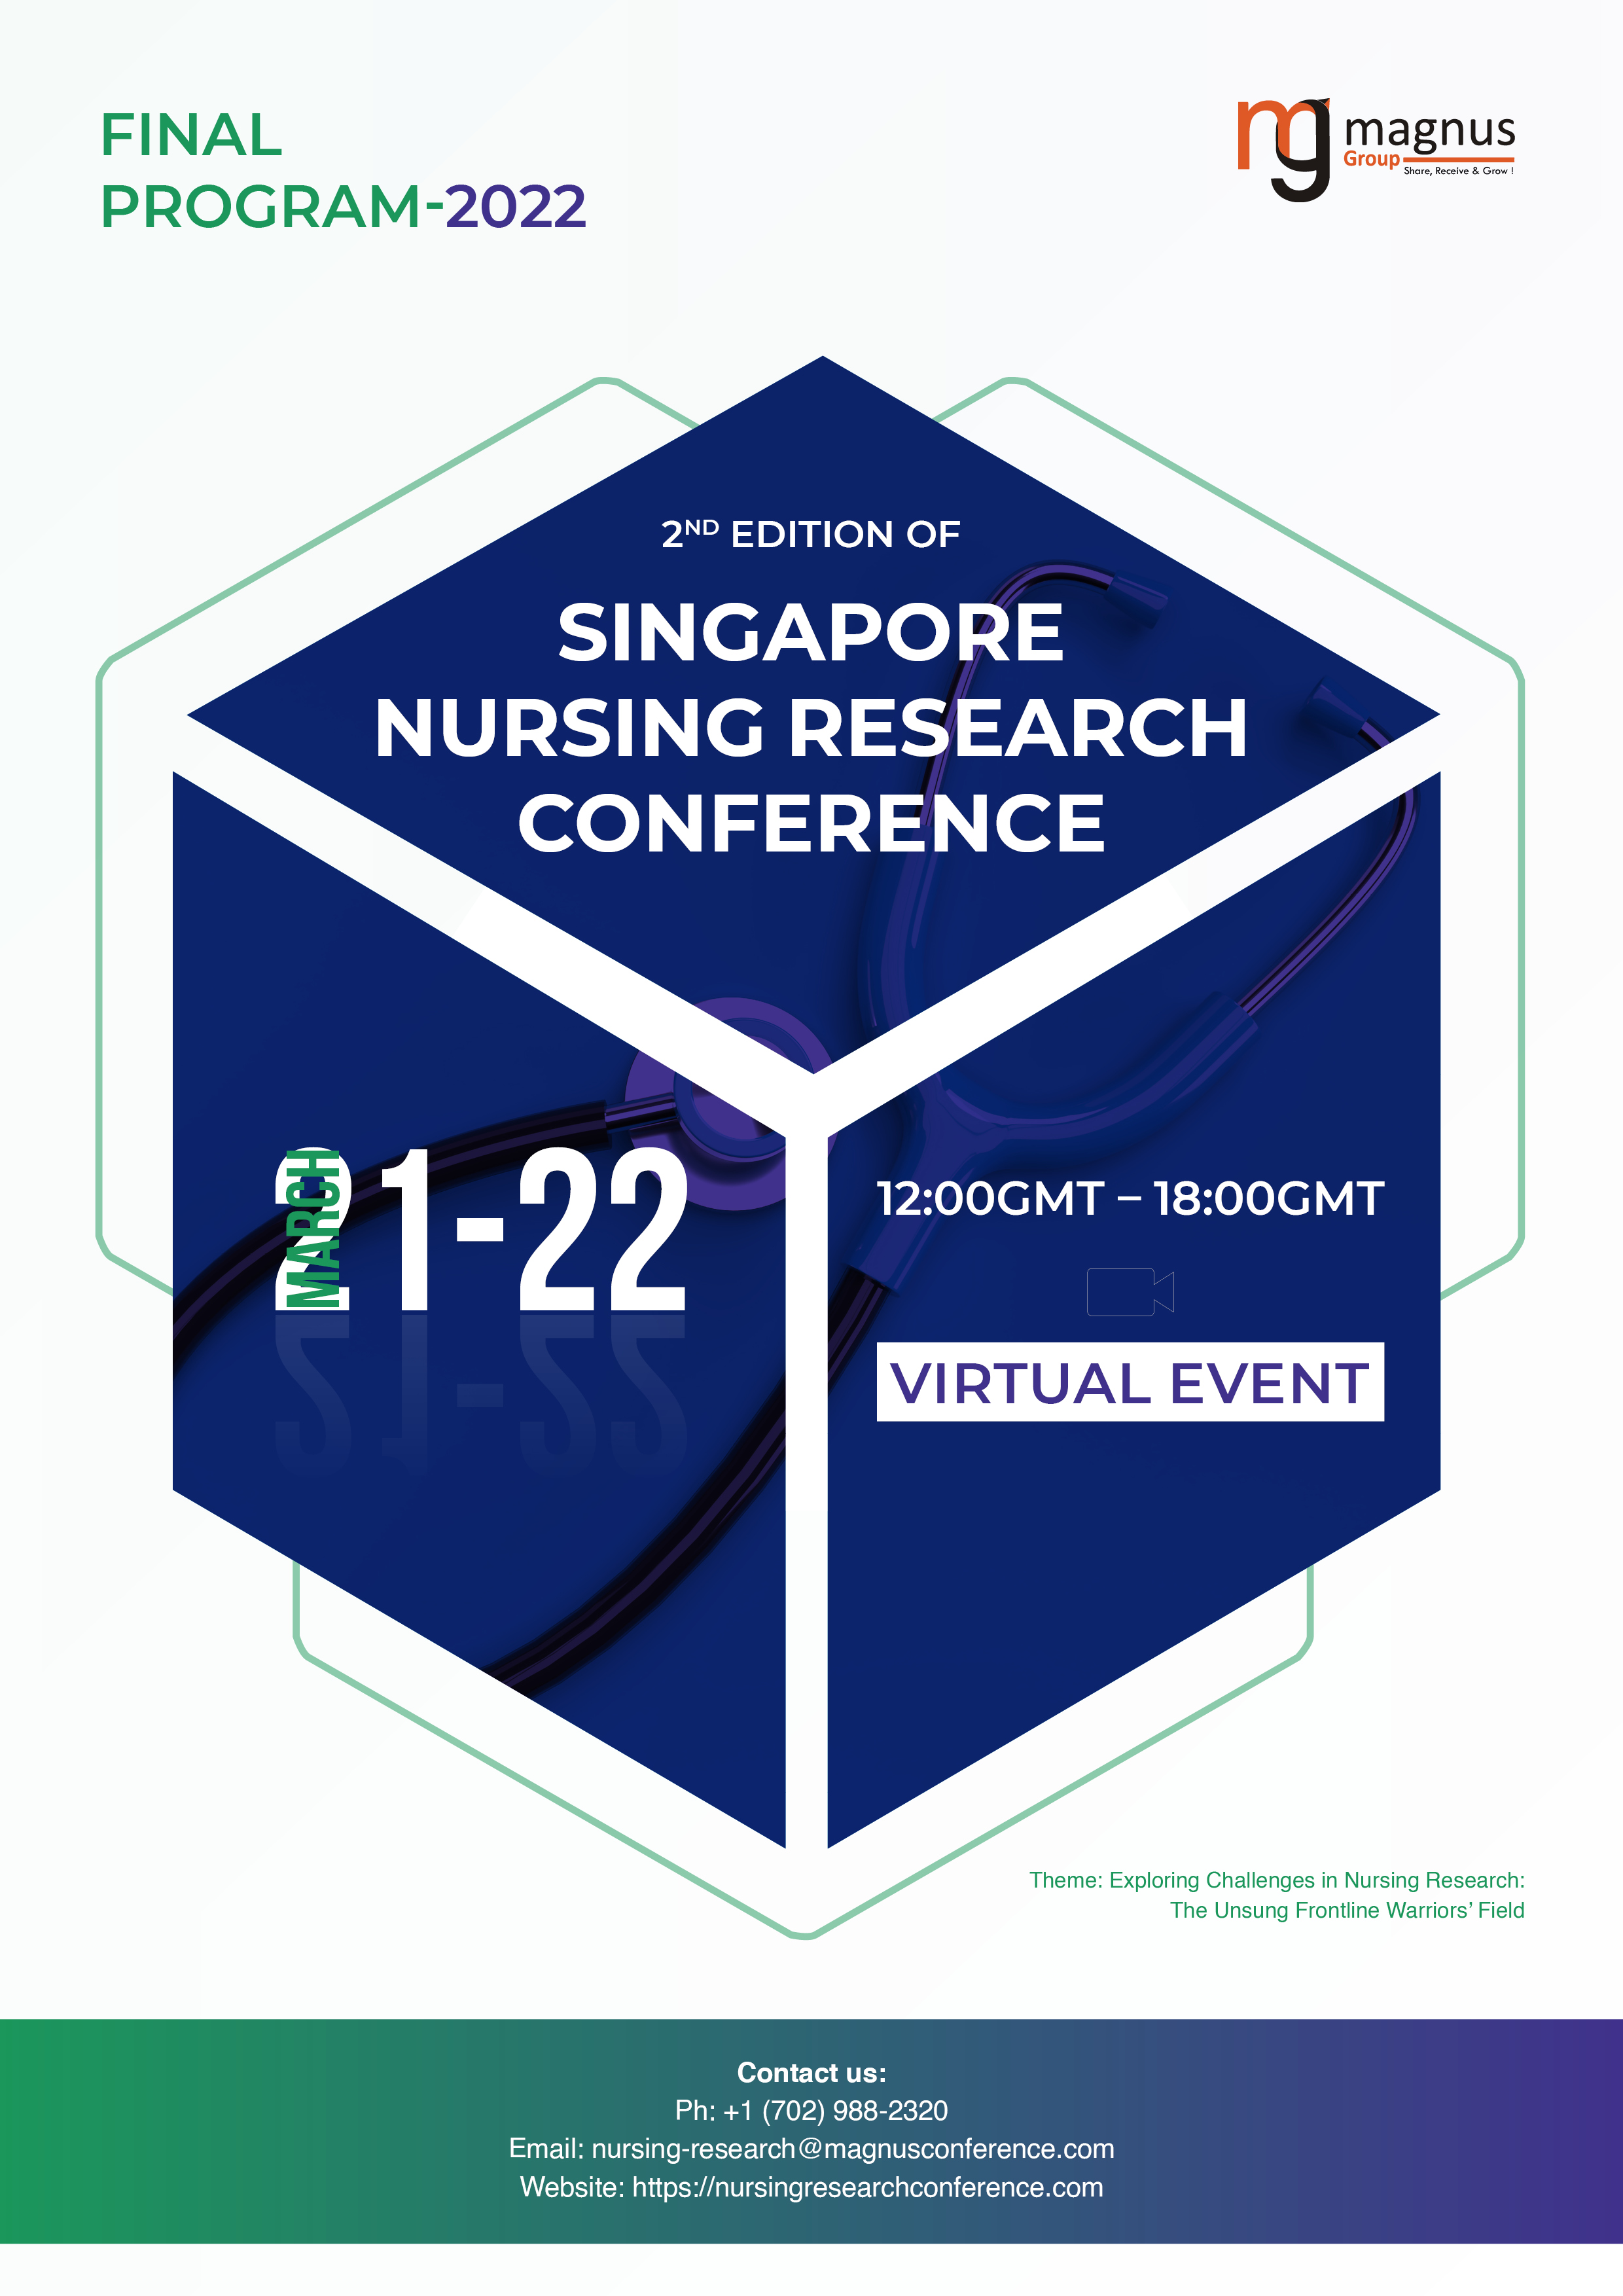 2nd Edition Of Singapore Nursing Research Conference | Online Event Program